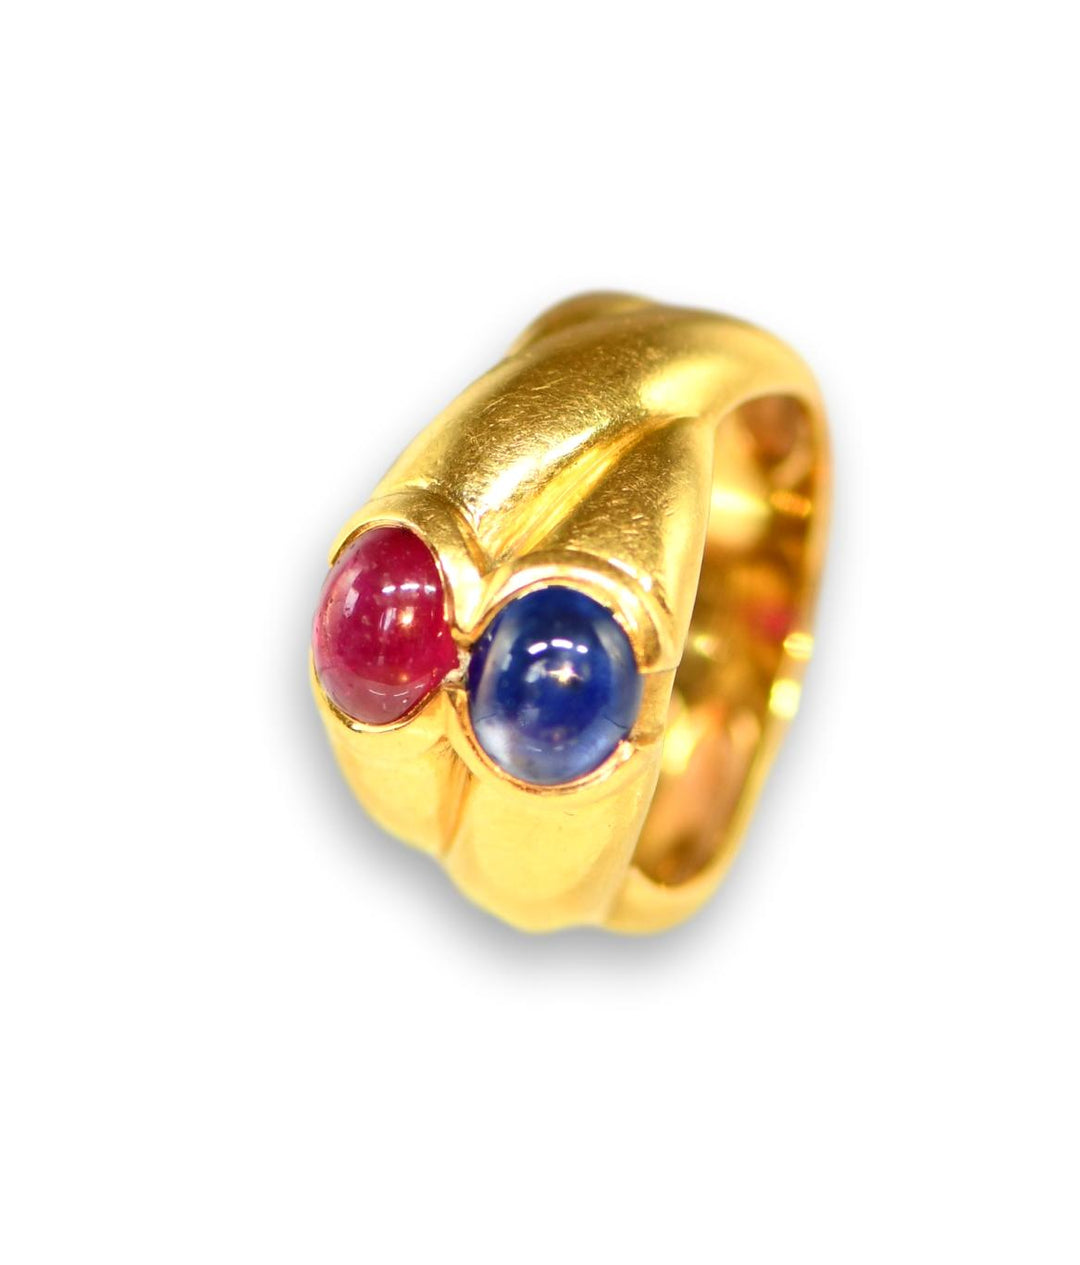 Ruby Sapphire Gold Cross Gold Ring - SOLD